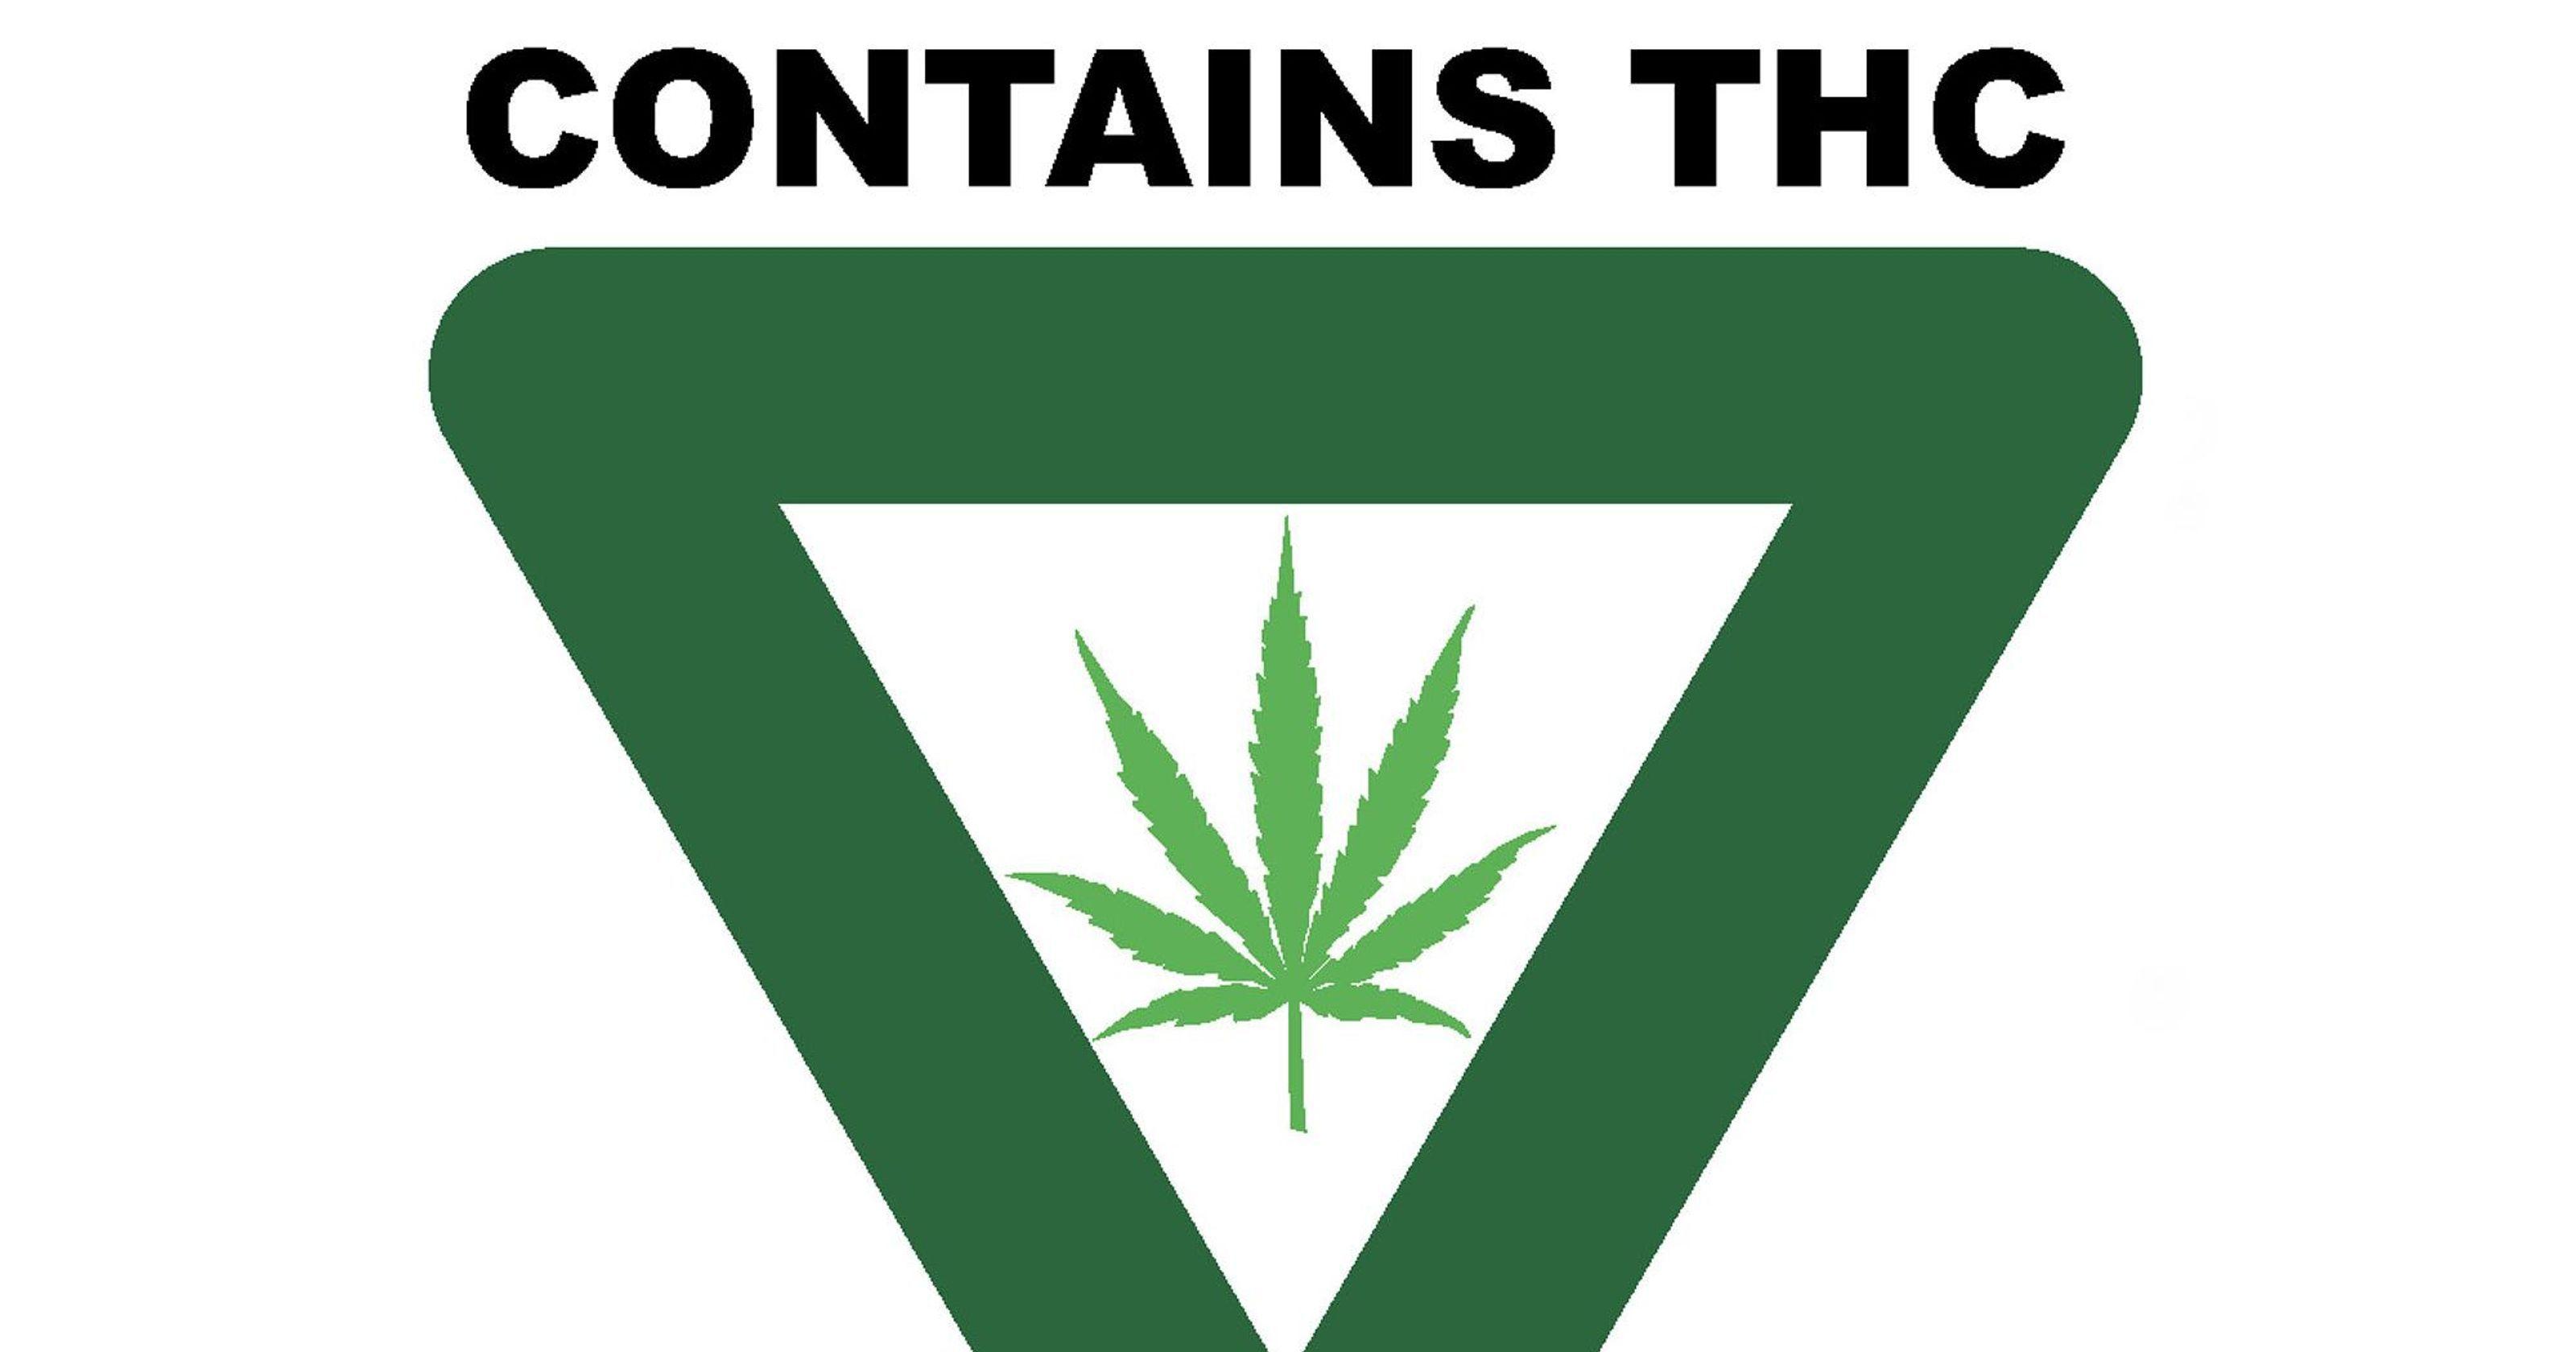 Upside Down Triangle Logo - Upside down, green triangle and cannabis leaf becomes pot symbol